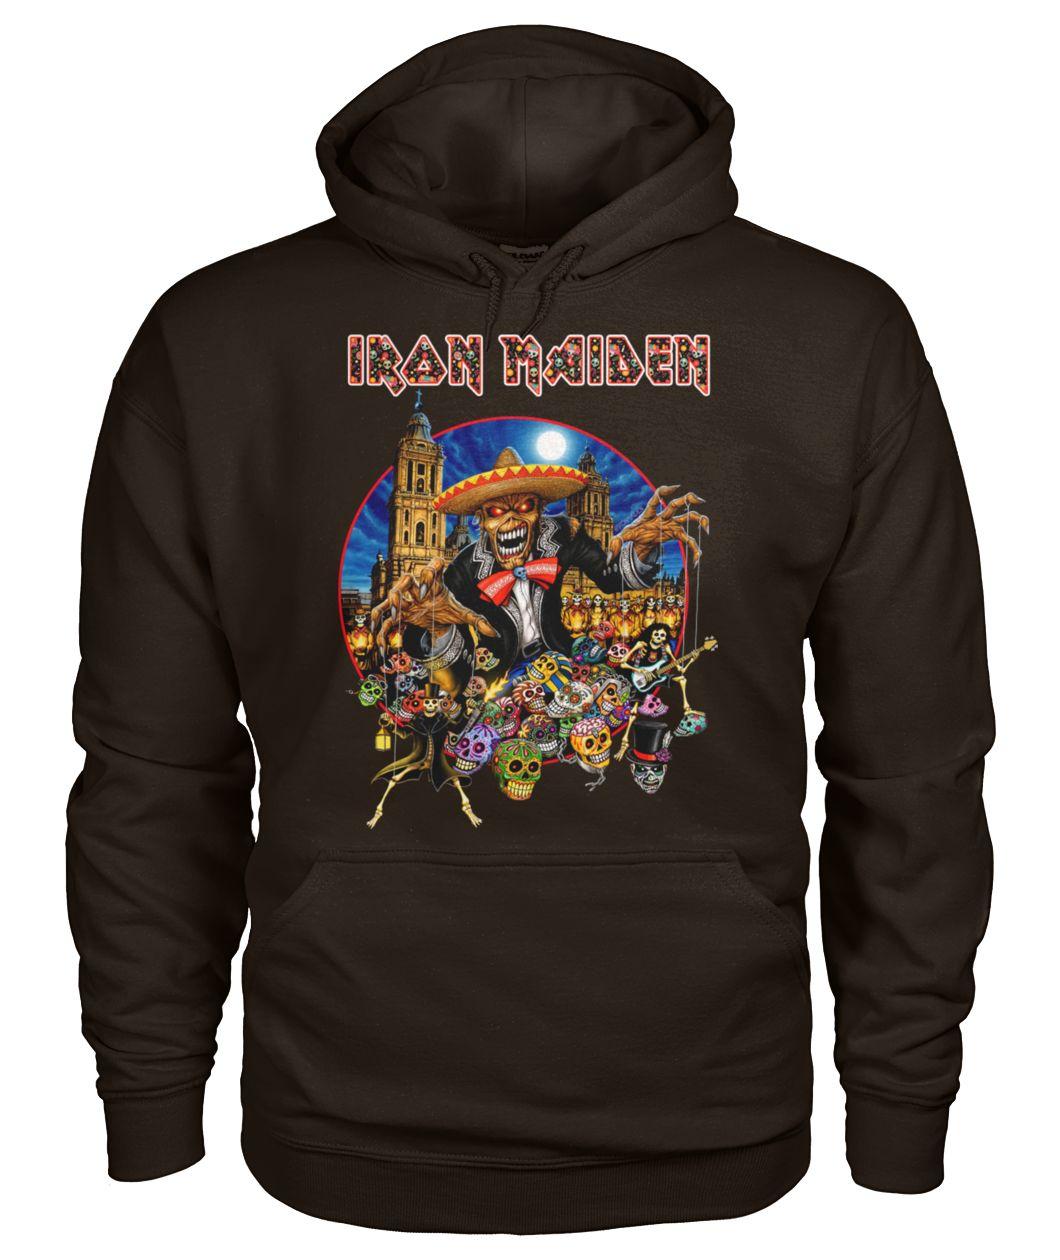 Iron maiden in the mexico city hoodie